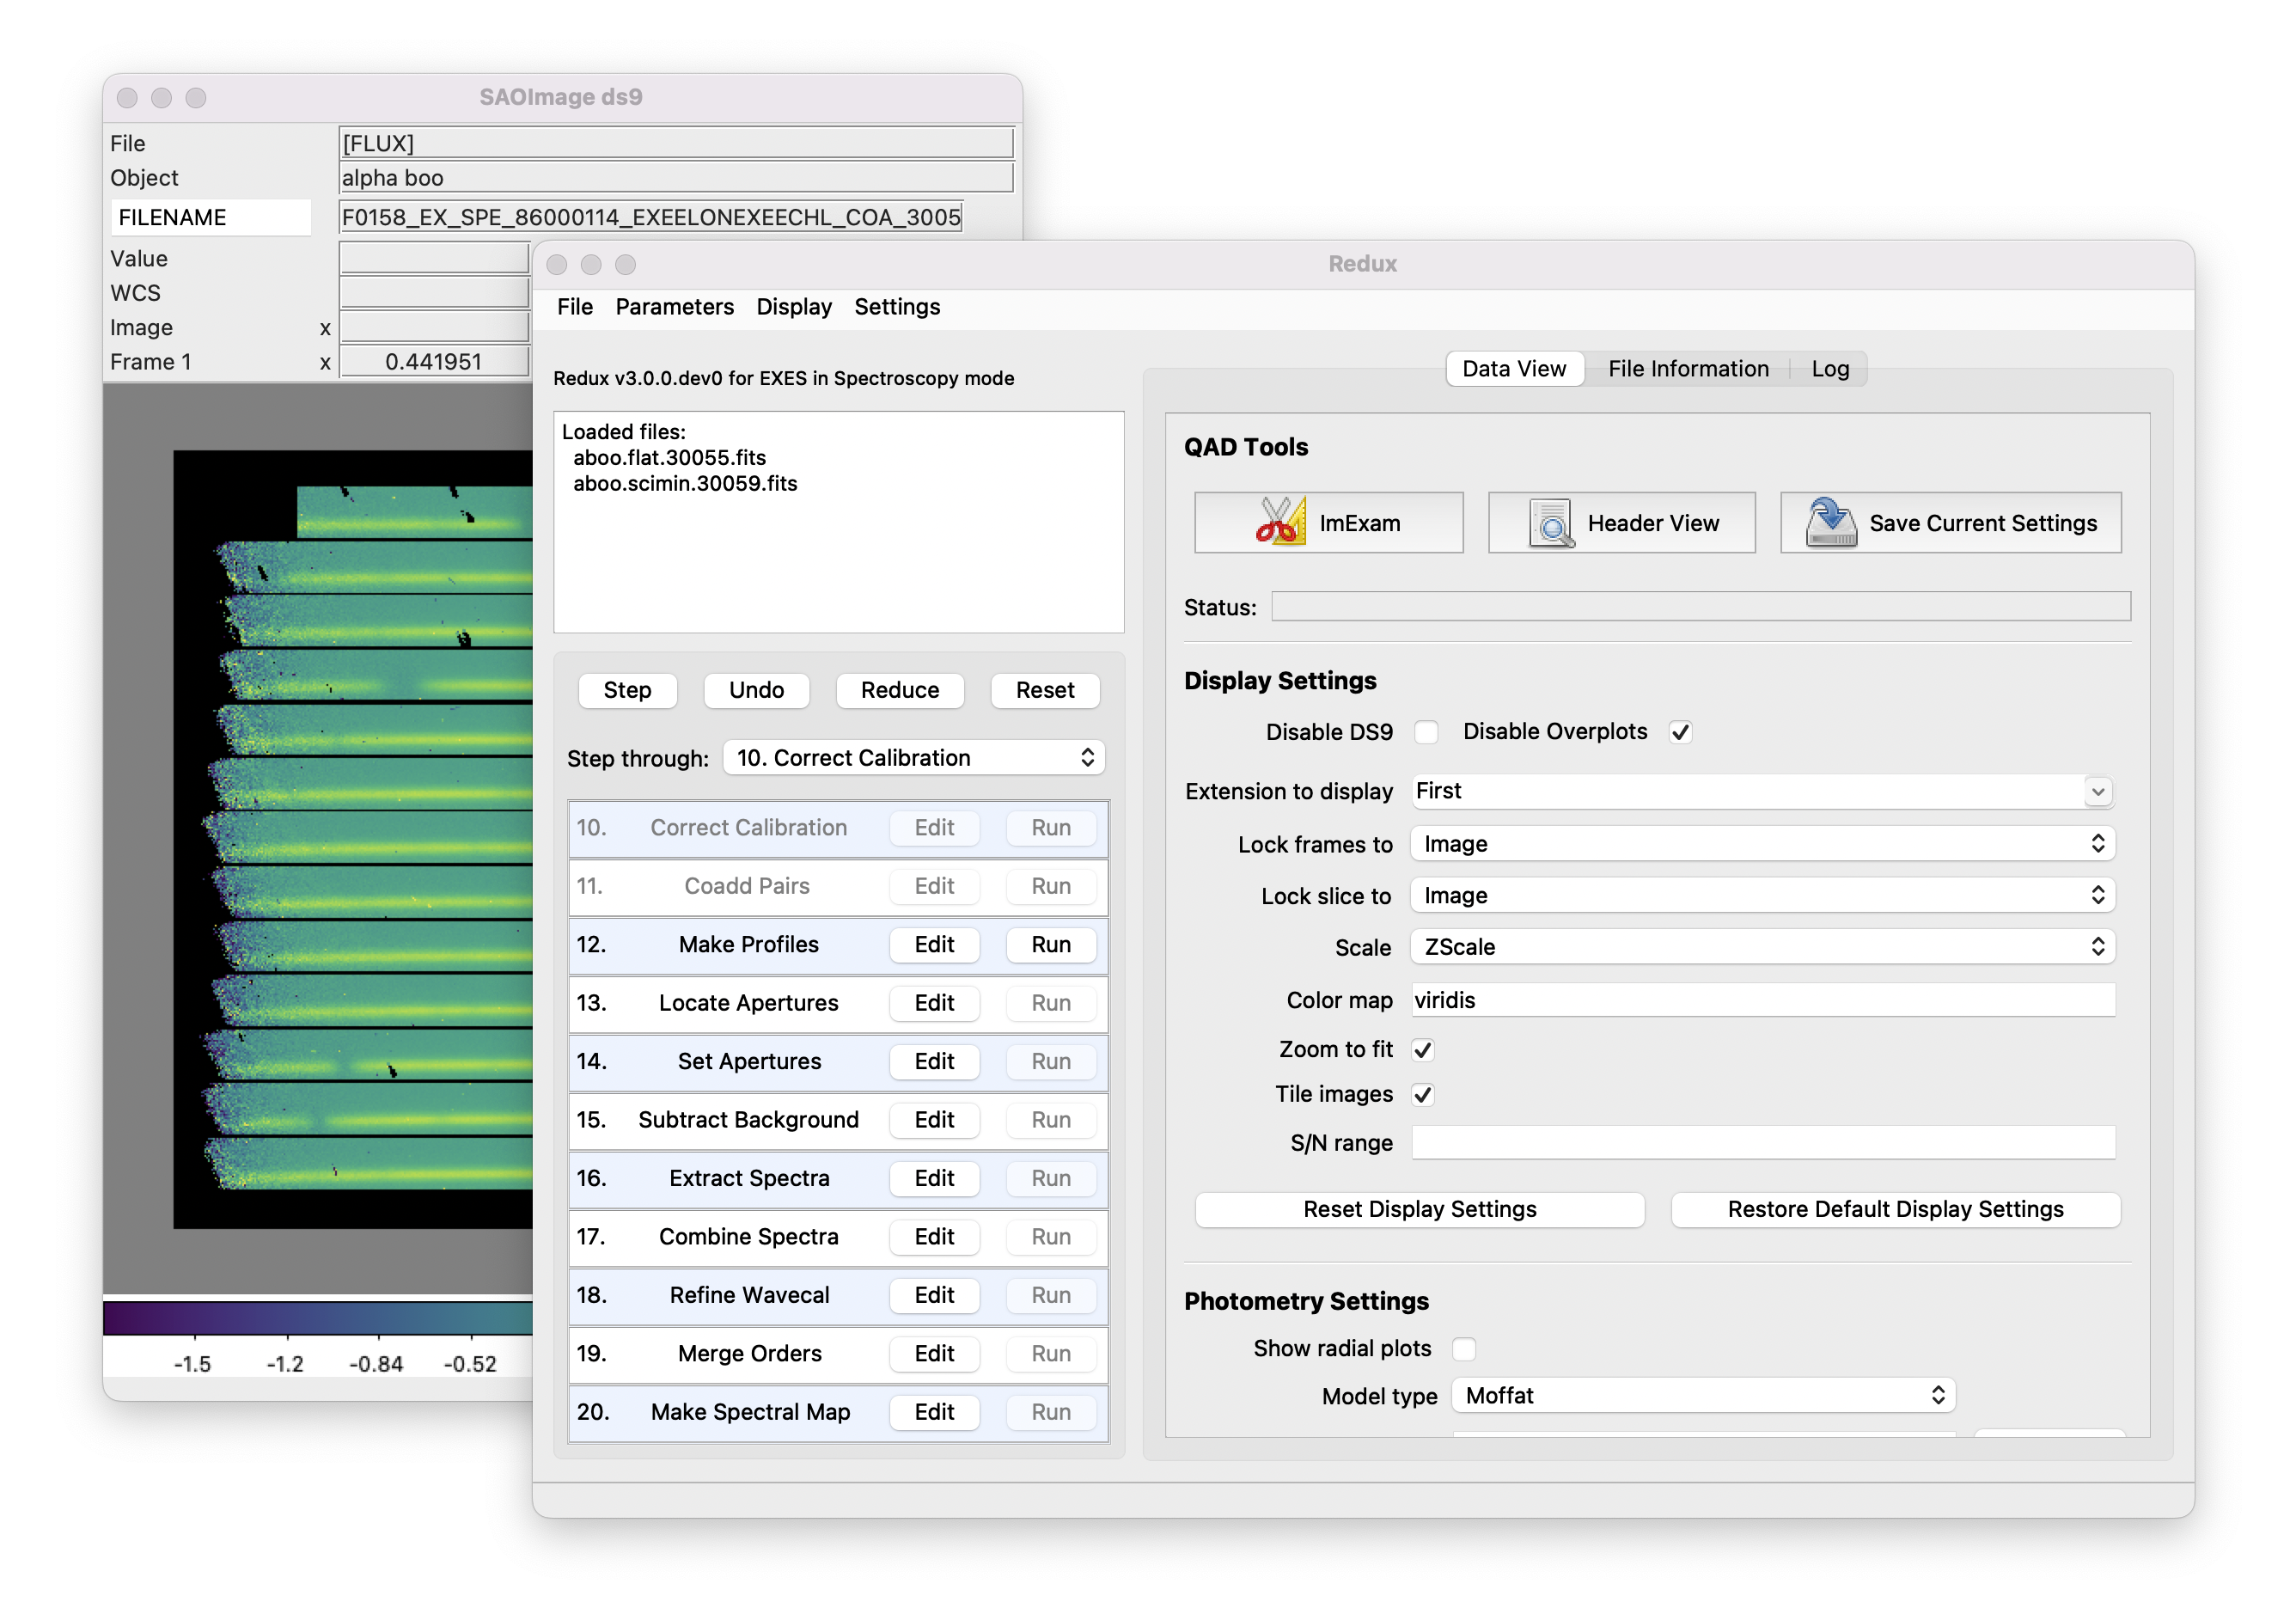 Data viewer settings with various widgets and buttons to control display parameters and analysis tools.